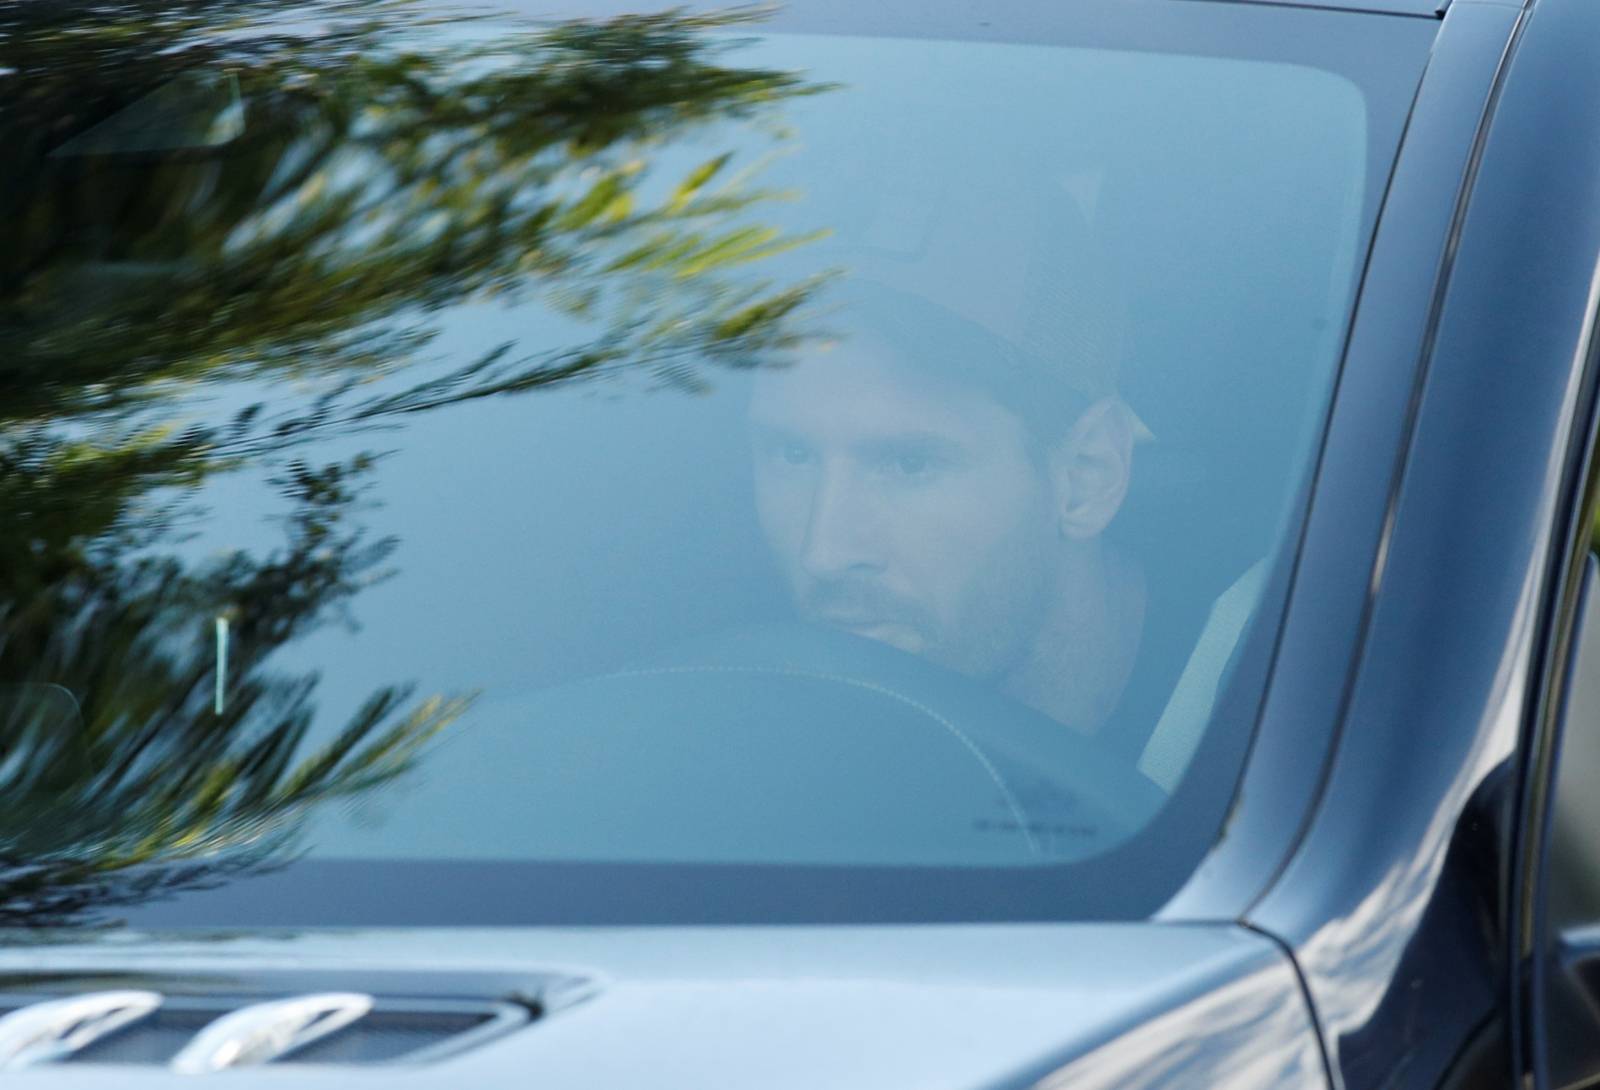 FC Barcelona players arrive for Training